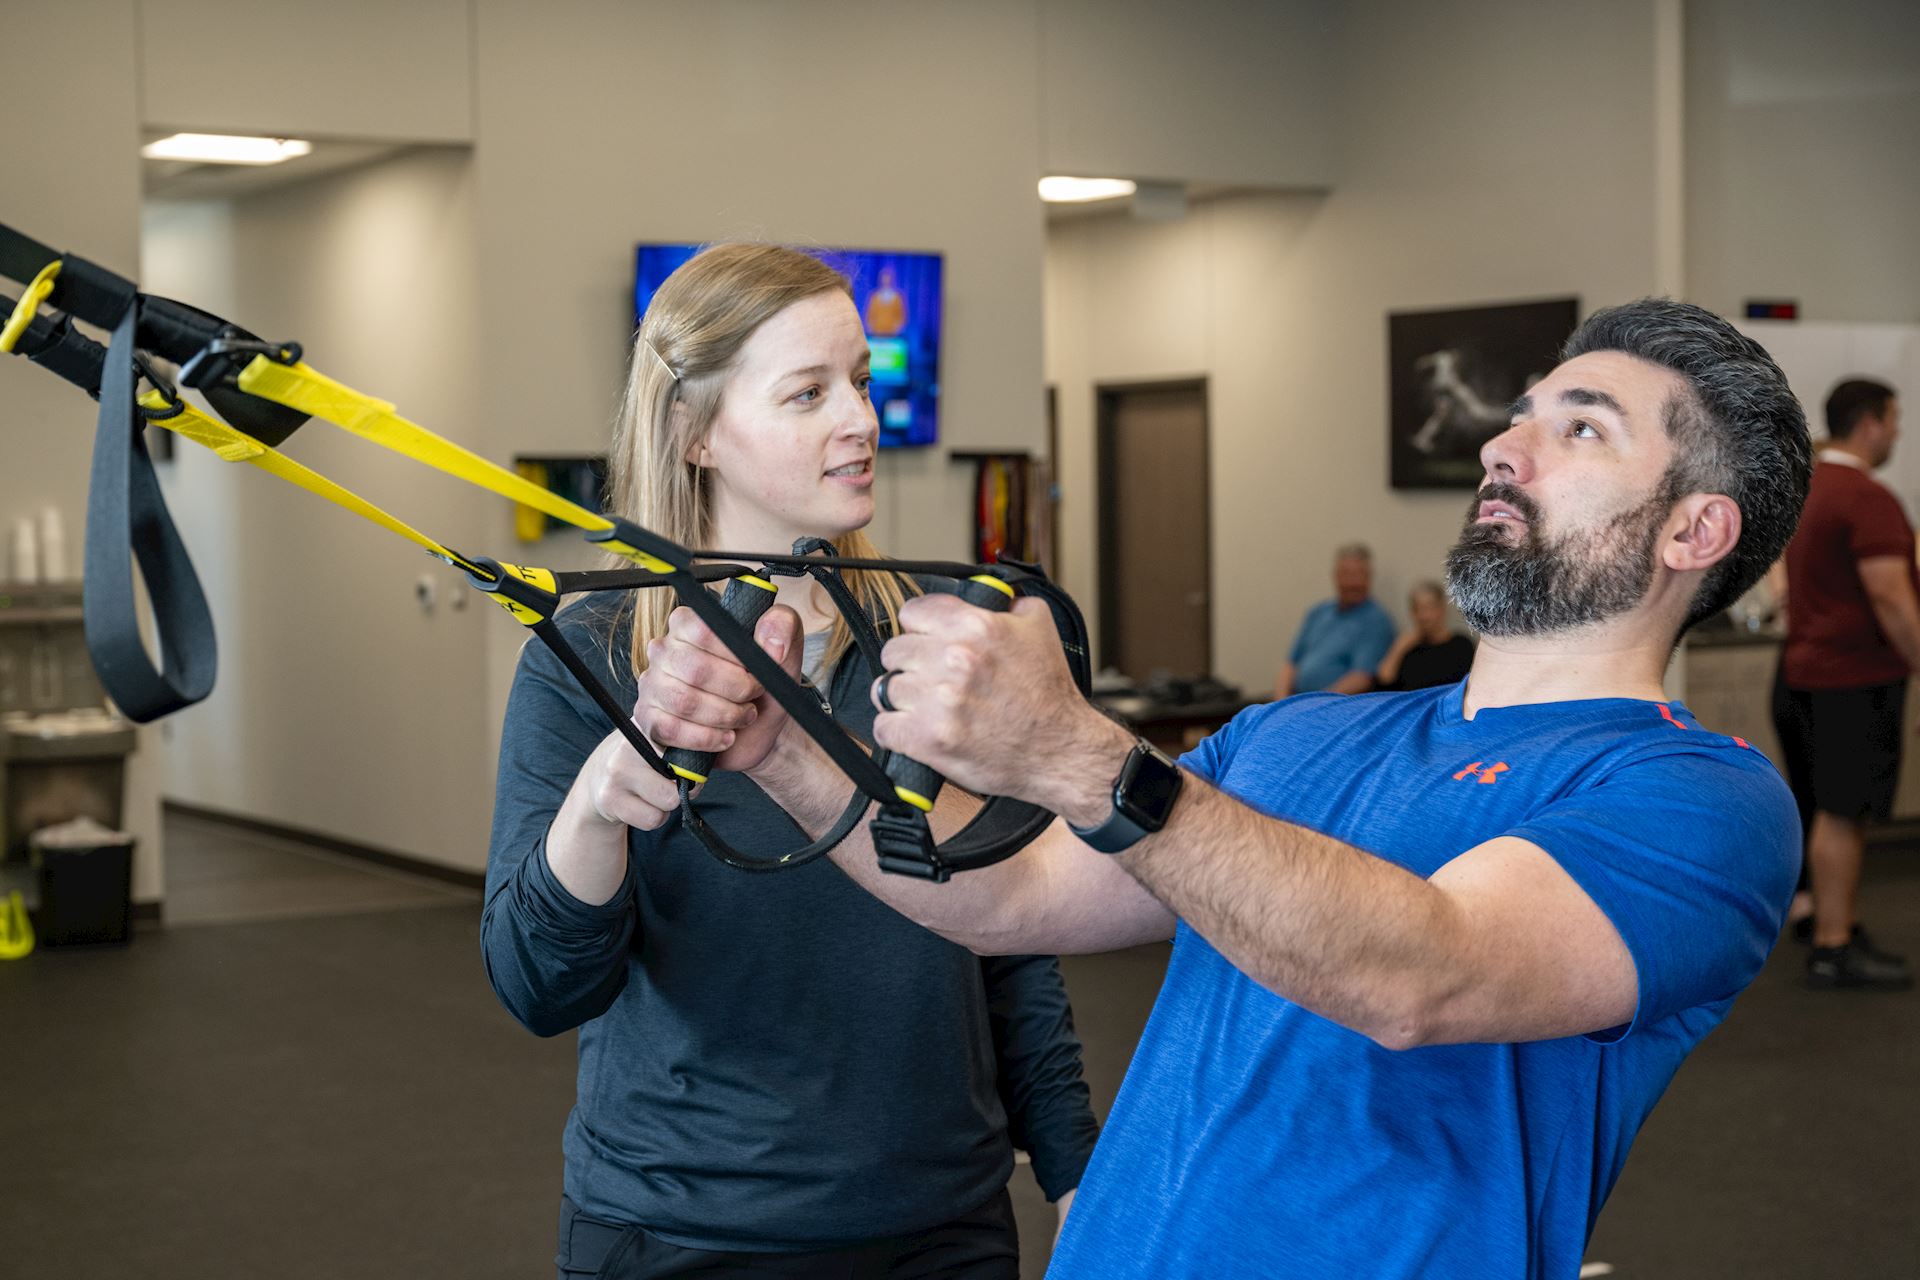 physical therapist assisting patient with proper use of a suspension training system